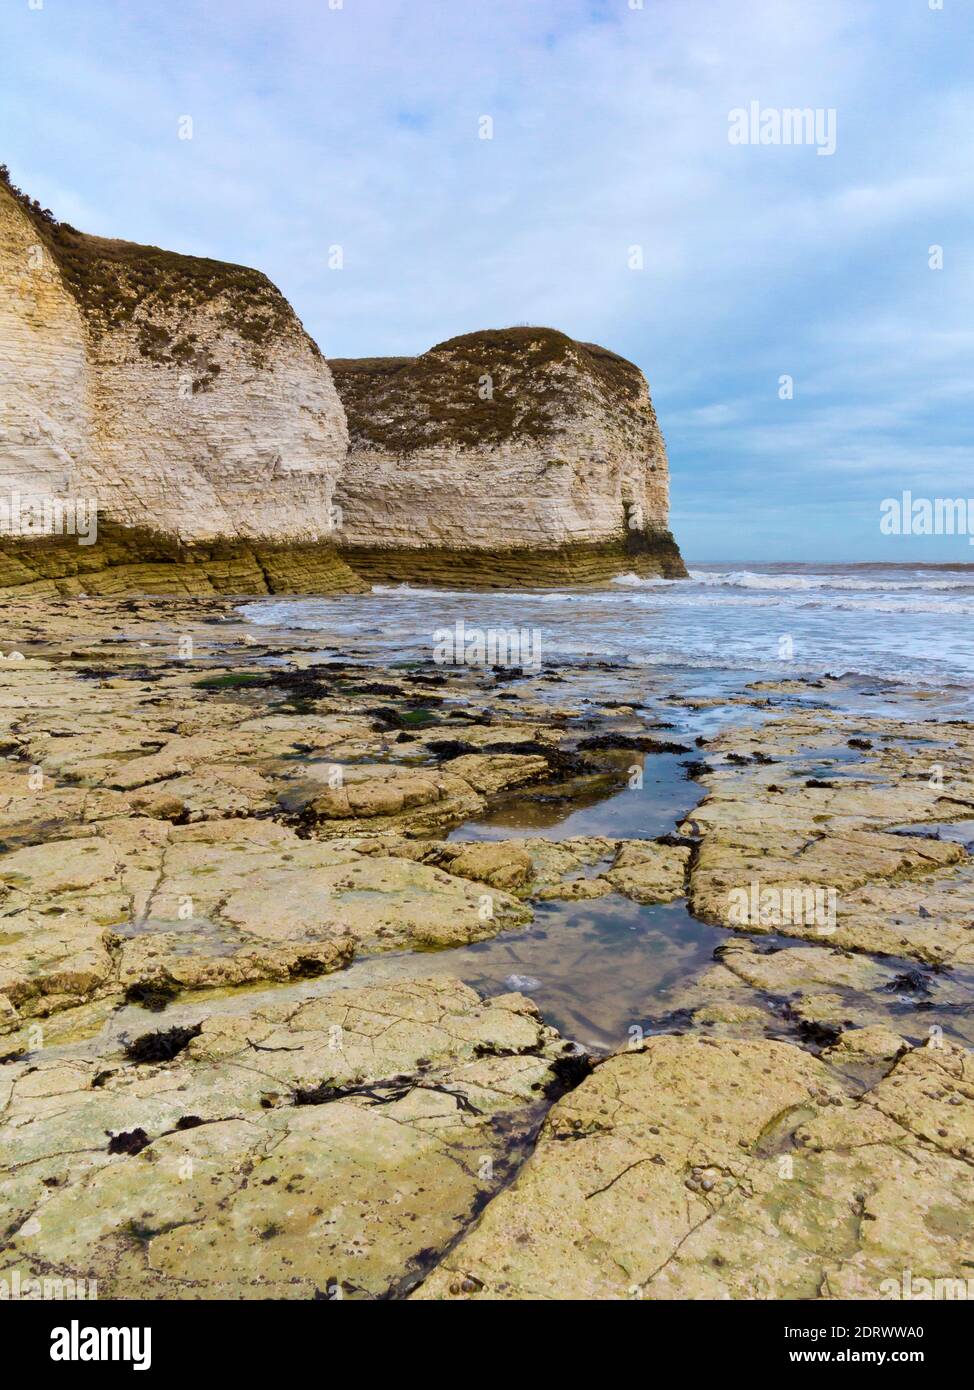 Chalk cliffs and beach at Flamborough Head on the North Yorkshire coast England UK with the North Sea visible. Stock Photo